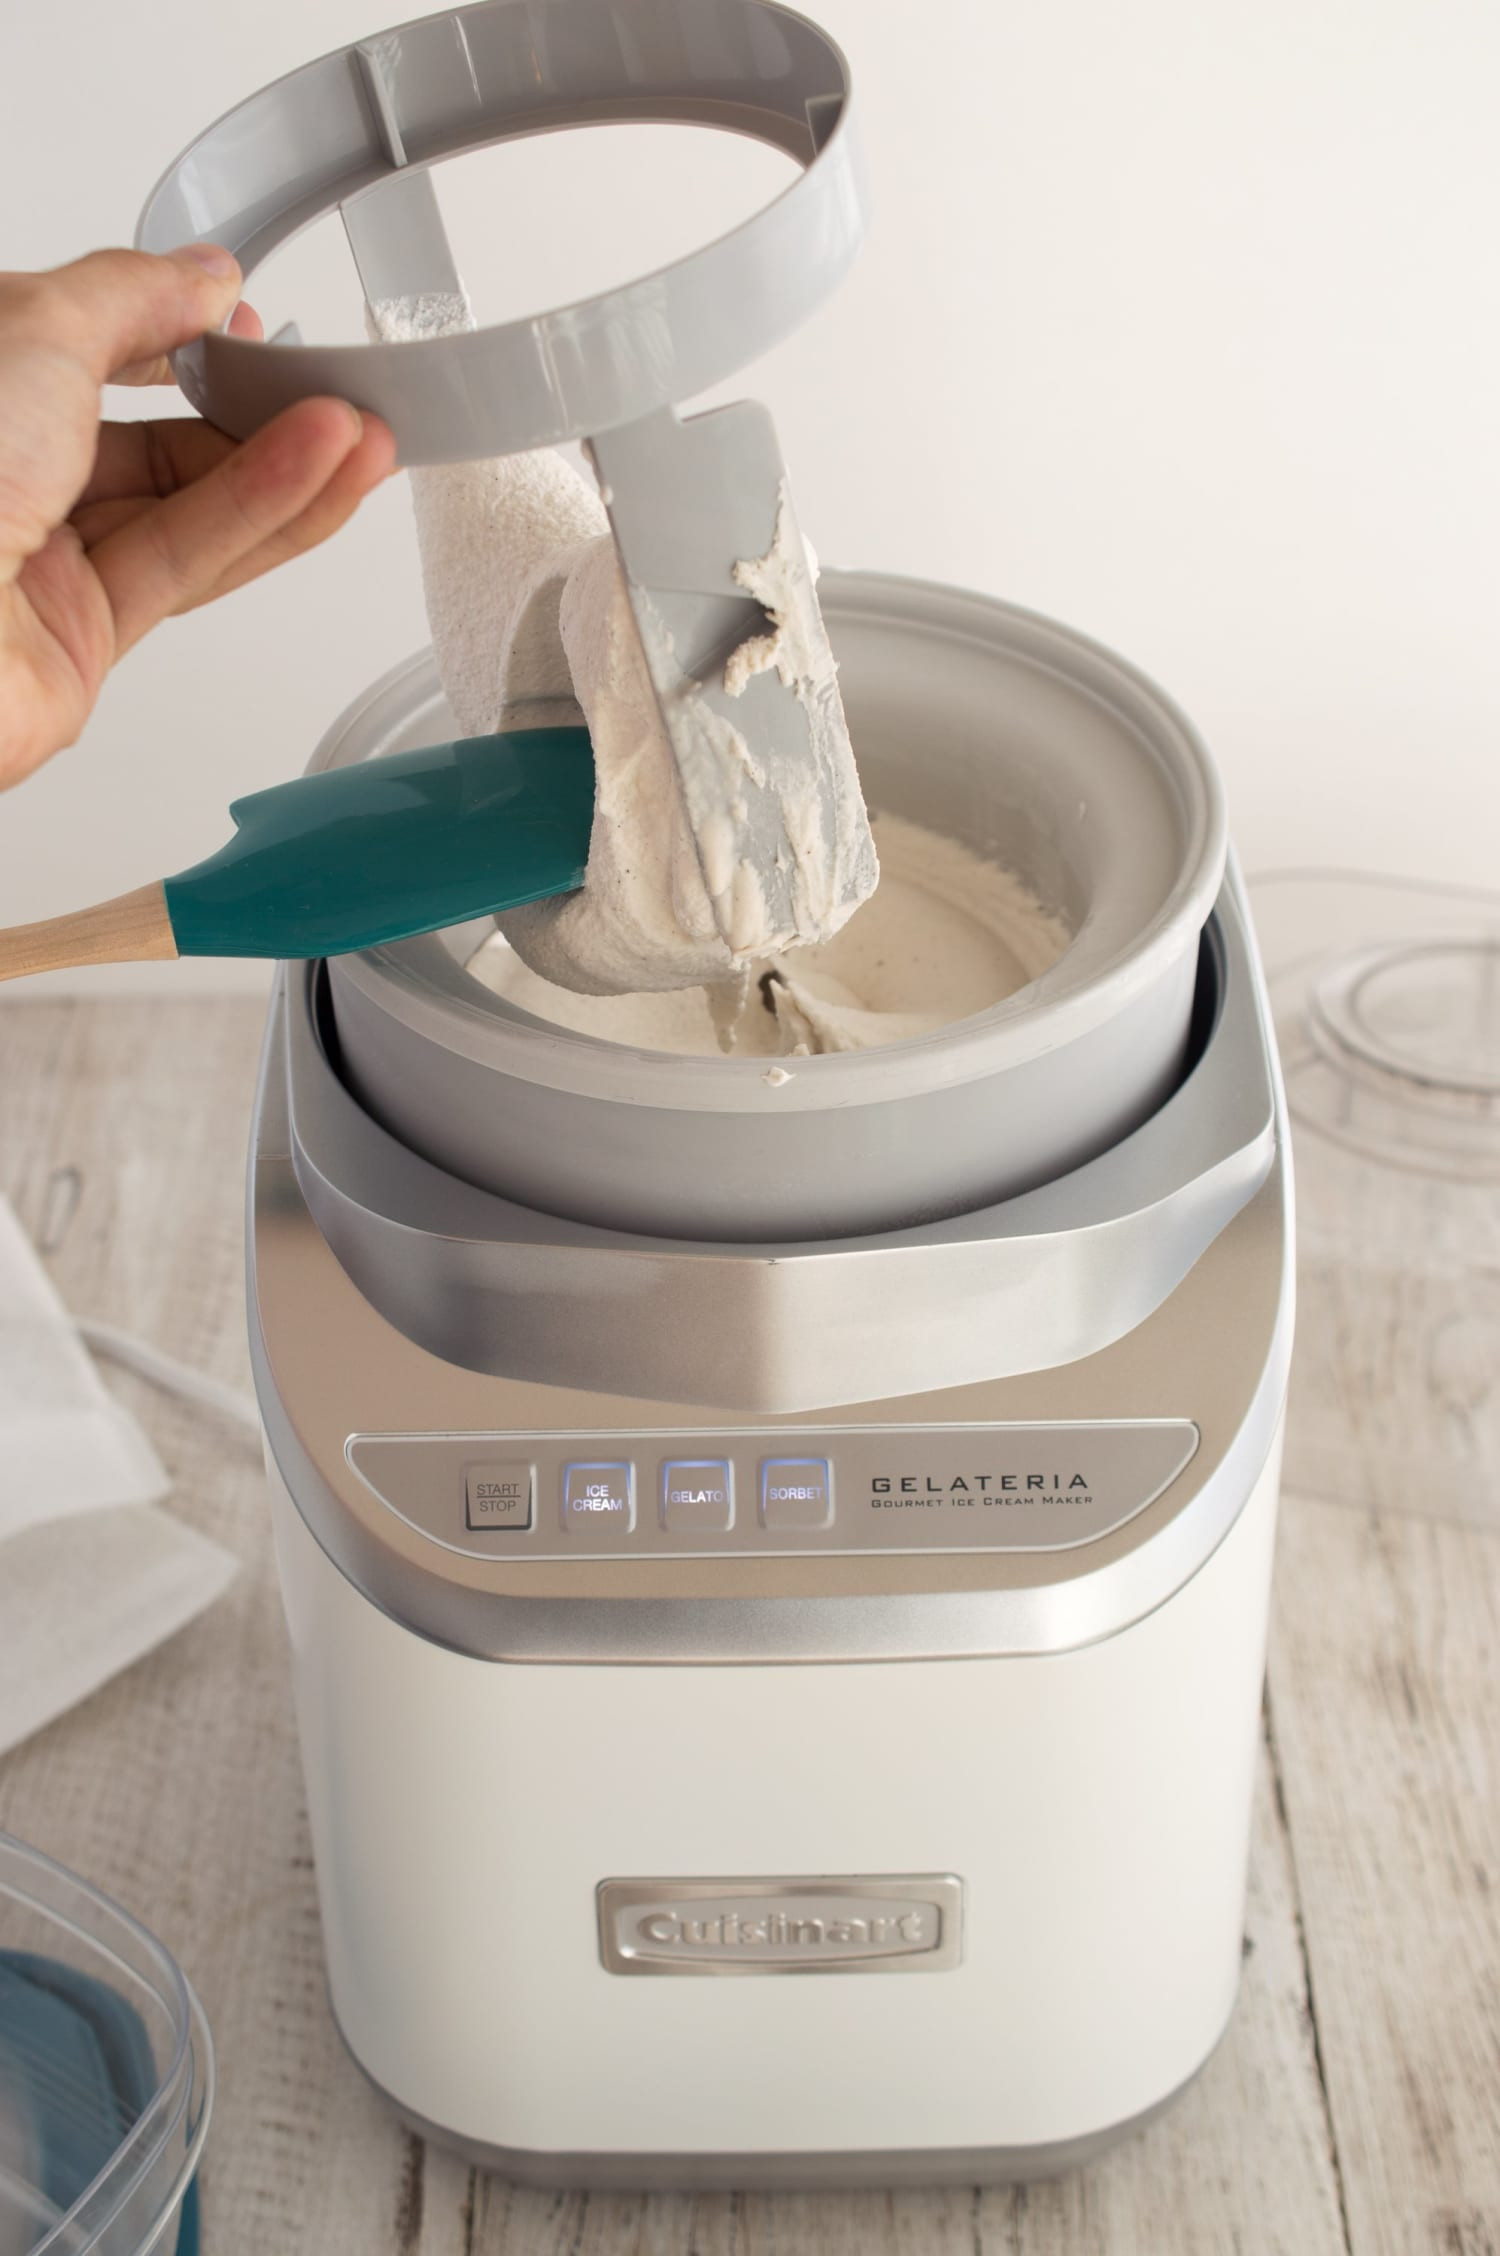 Low Fat Ice Cream Recipes For Cuisinart Ice Cream Makers
 We Reviewed the Cuisinart Gelateria Ice Cream Maker and